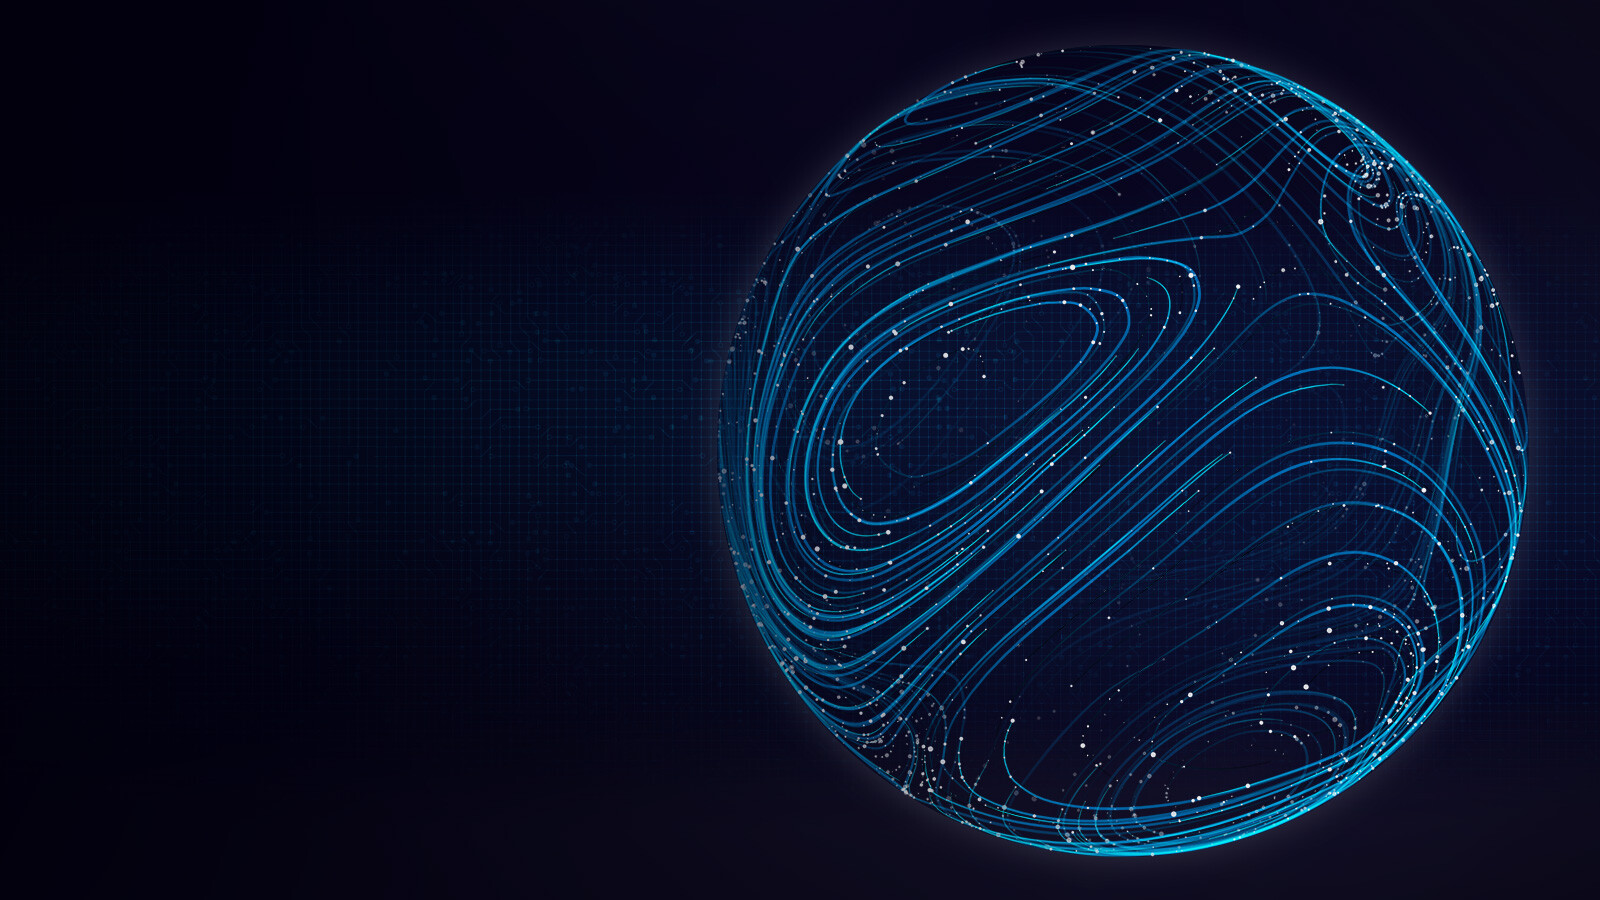 Dark background with a large 3D sphere made of blue and teal circles